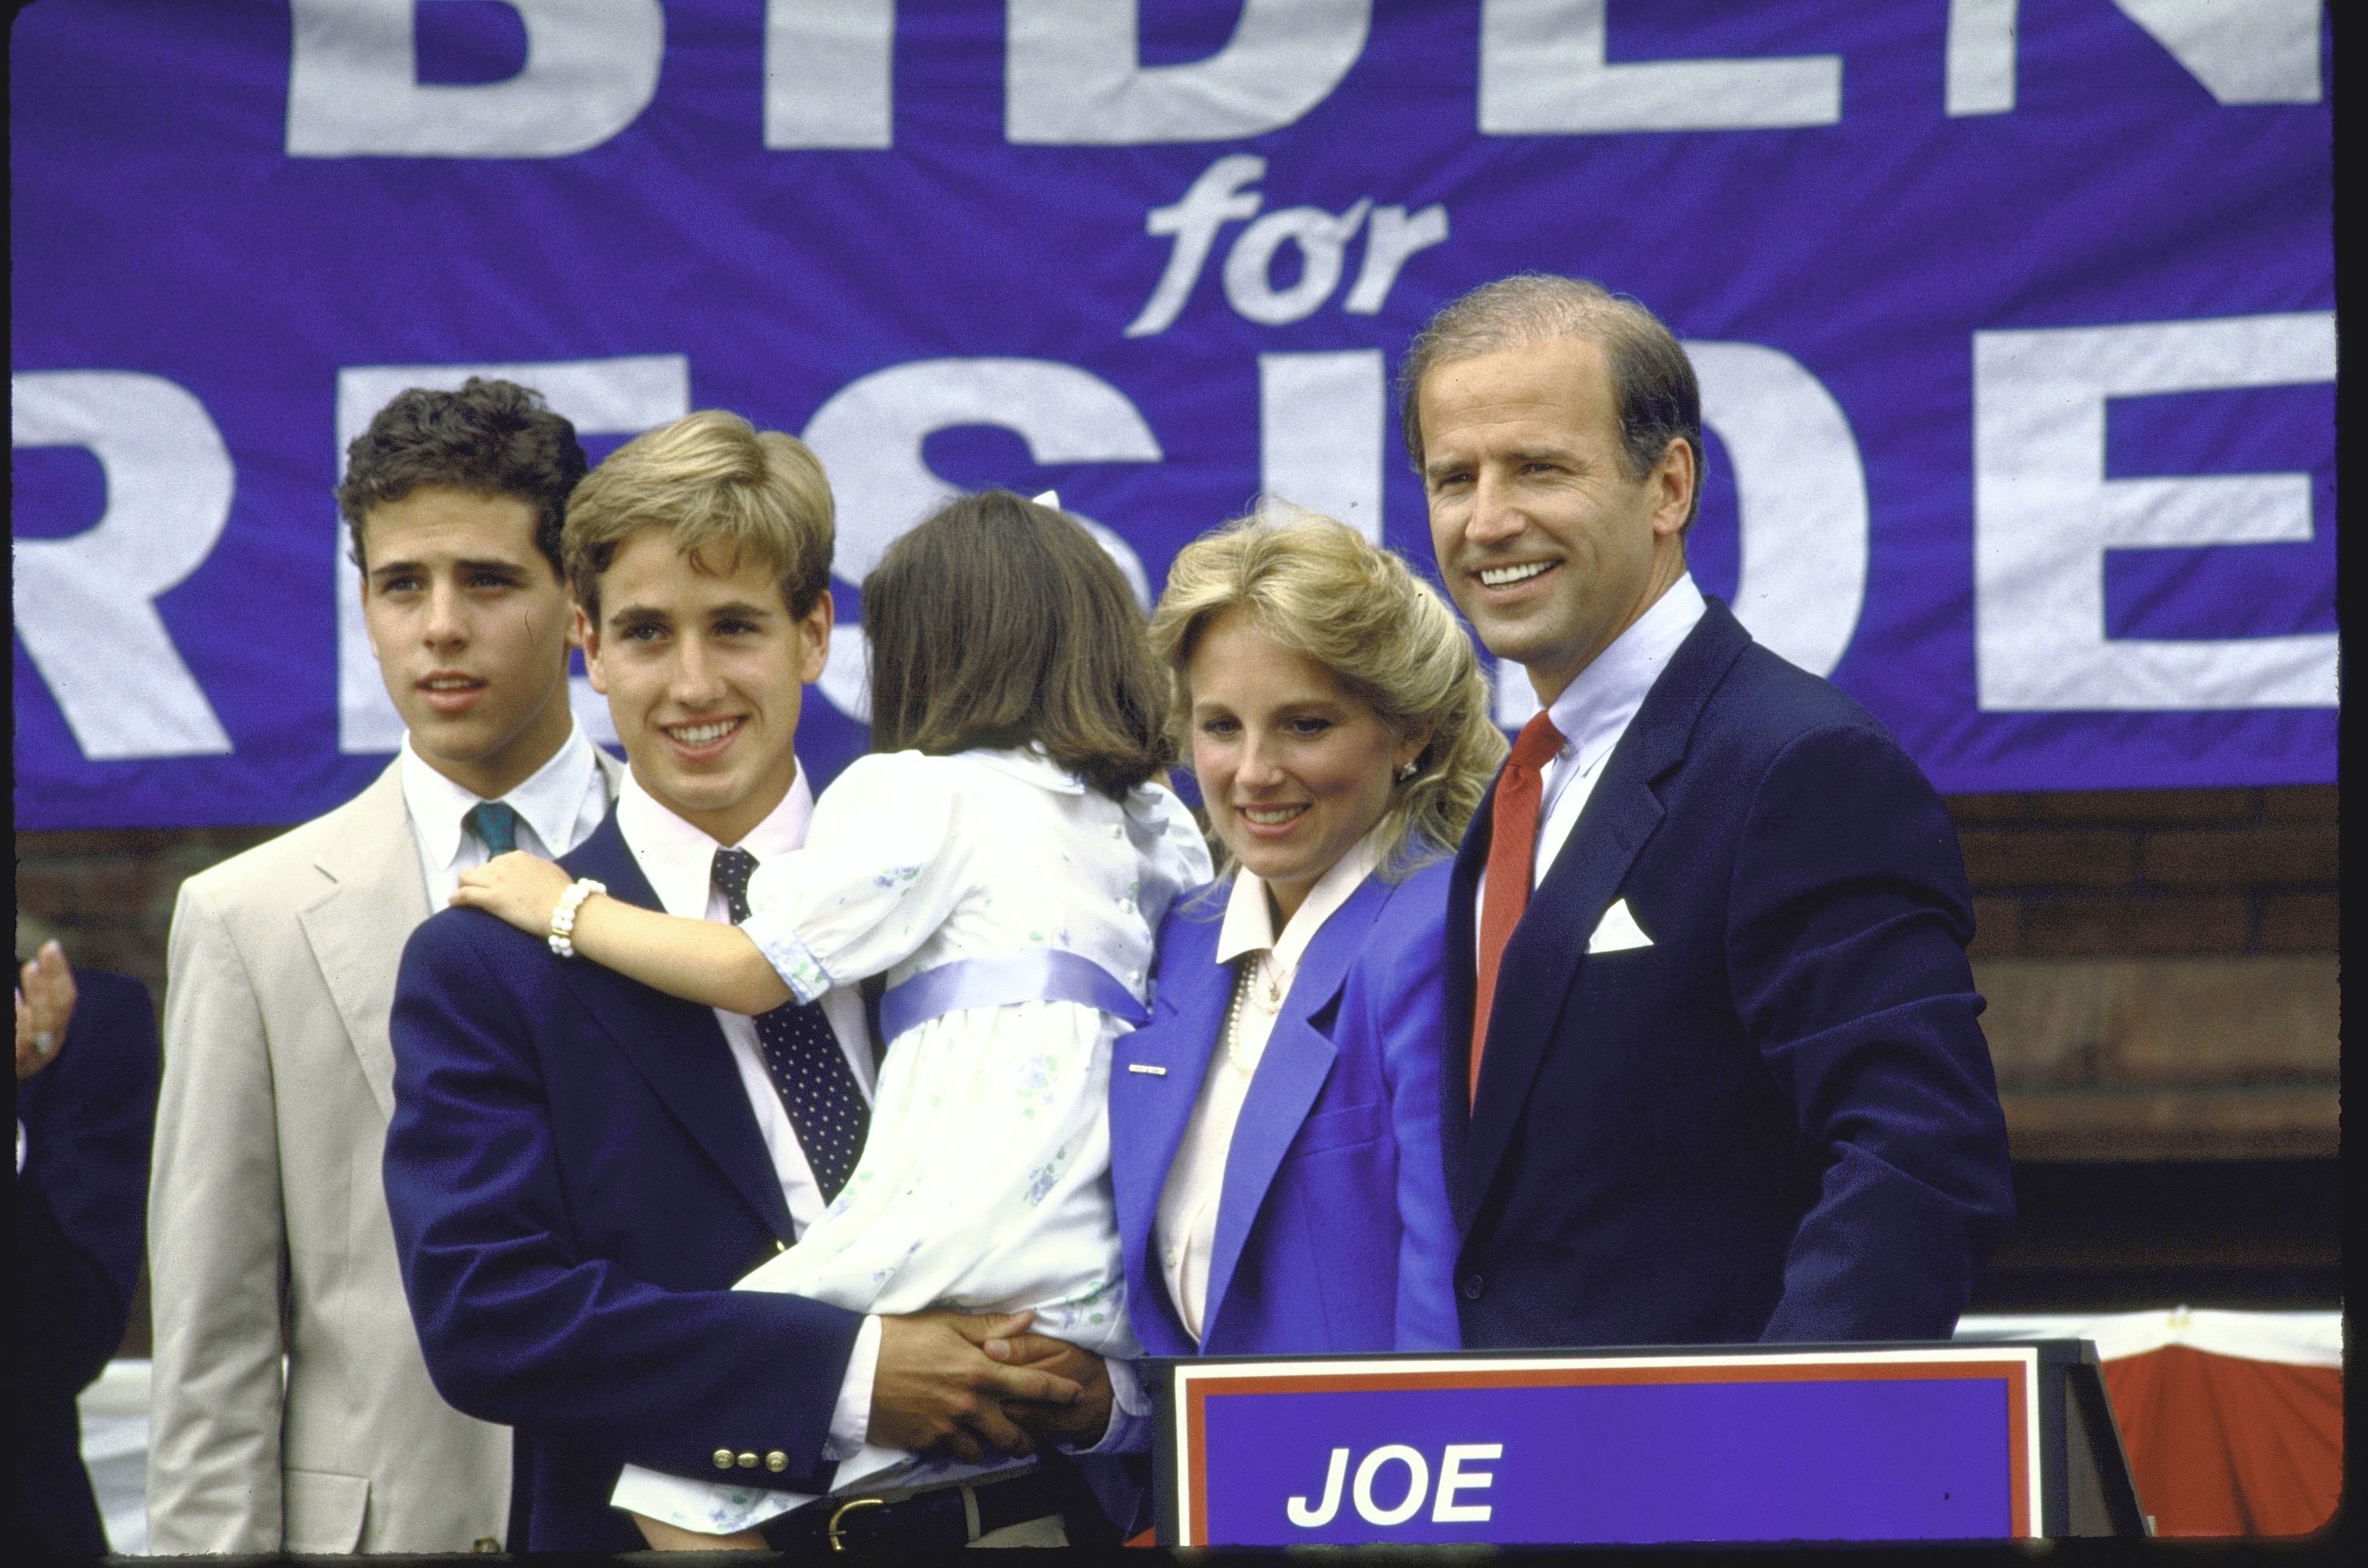 Joe Biden with sons Beau and Hunter, as well as daughter Ashley and wife Jill after announcing his candidacy for the Democratic presidential nomination | Photo: Cynthia Johnson/The LIFE Images Collection via Getty Images